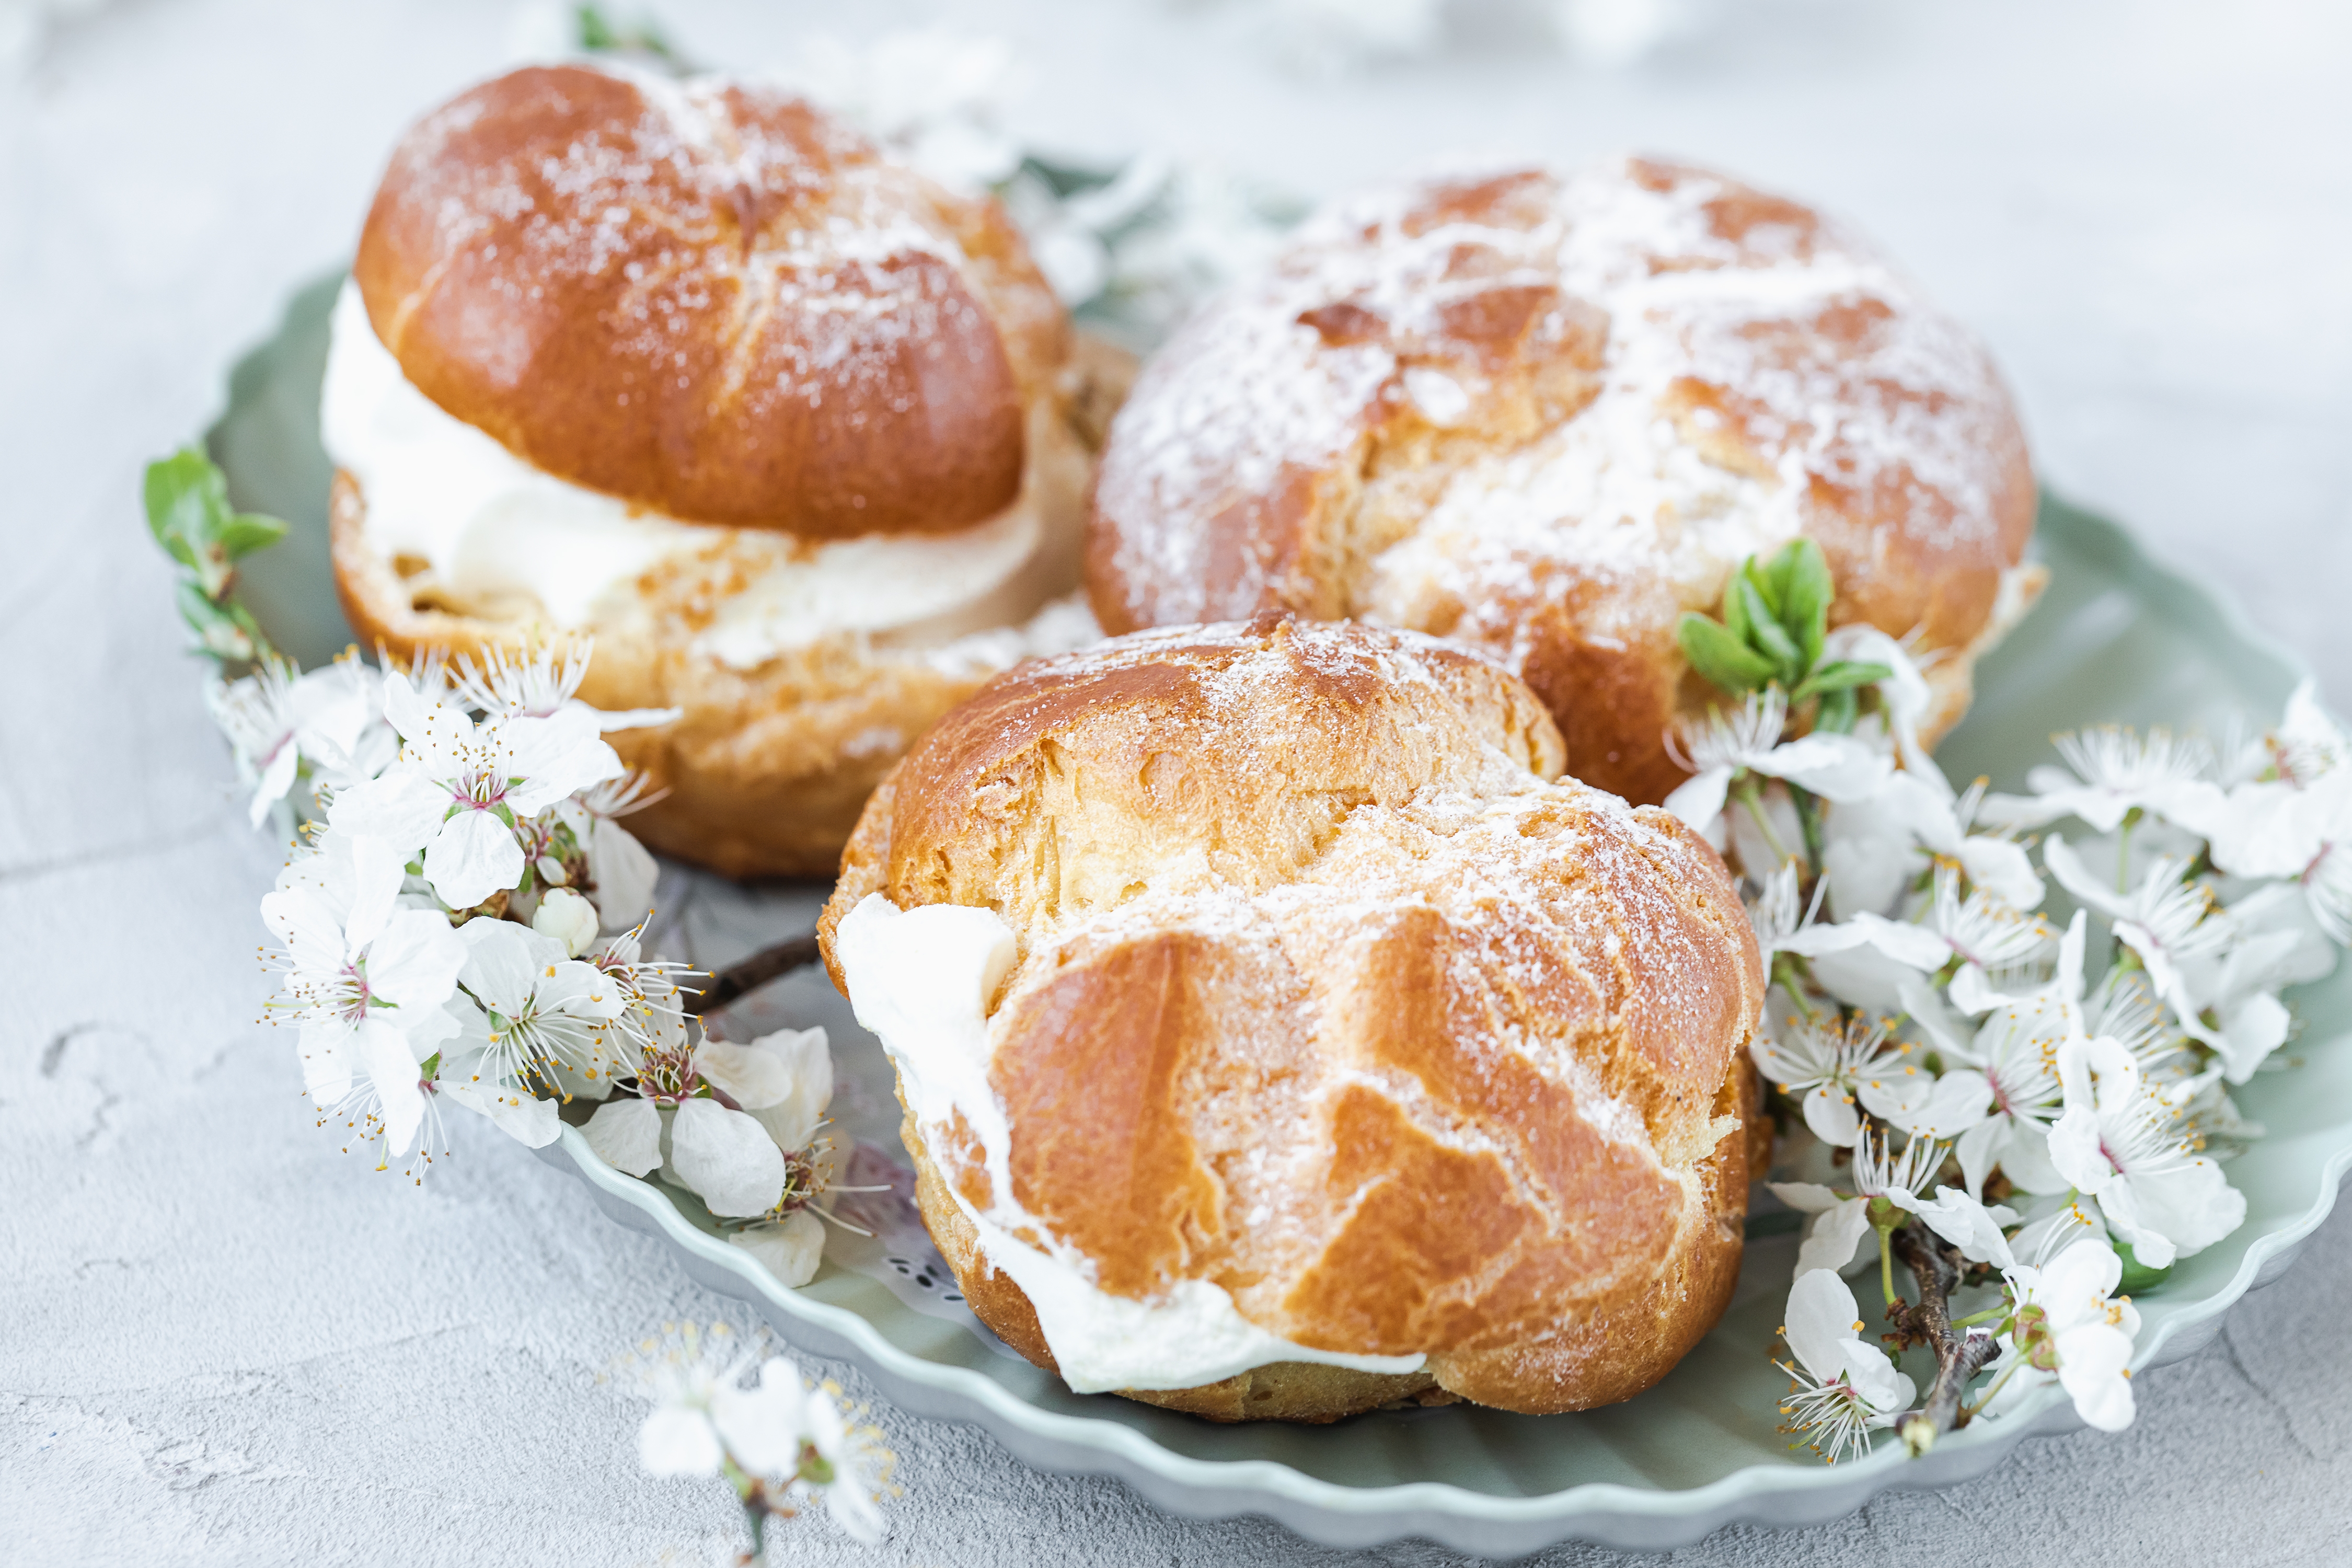 Choux Buns with whipped cream and sugar powder on top. Choux pastry dessert. French cream puffs